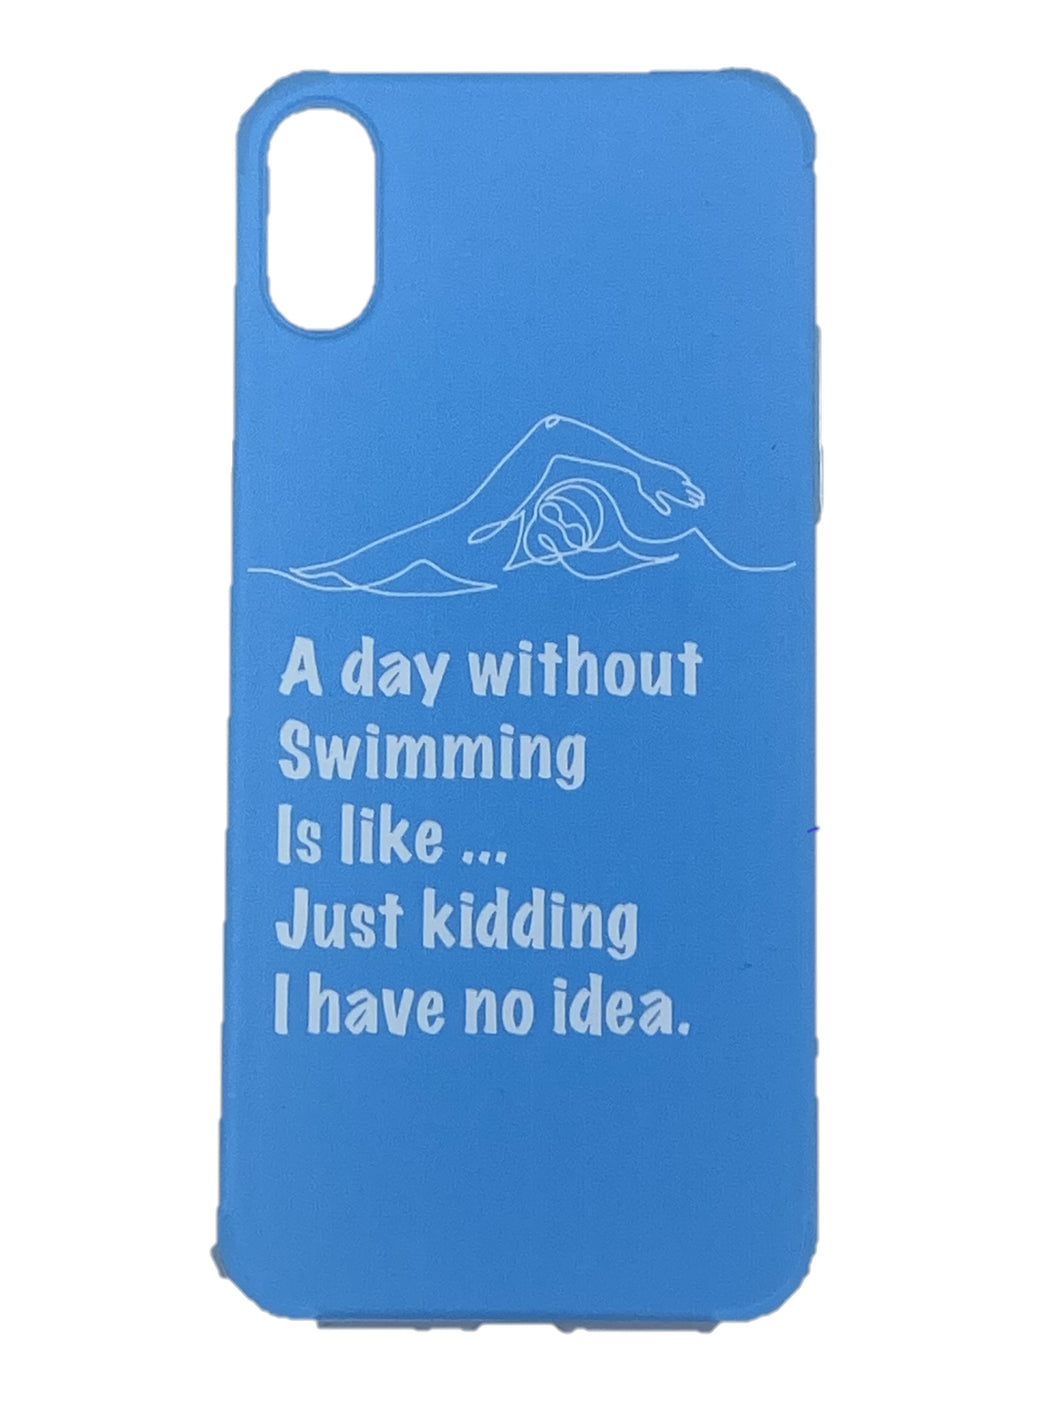 iPhone Cover - 